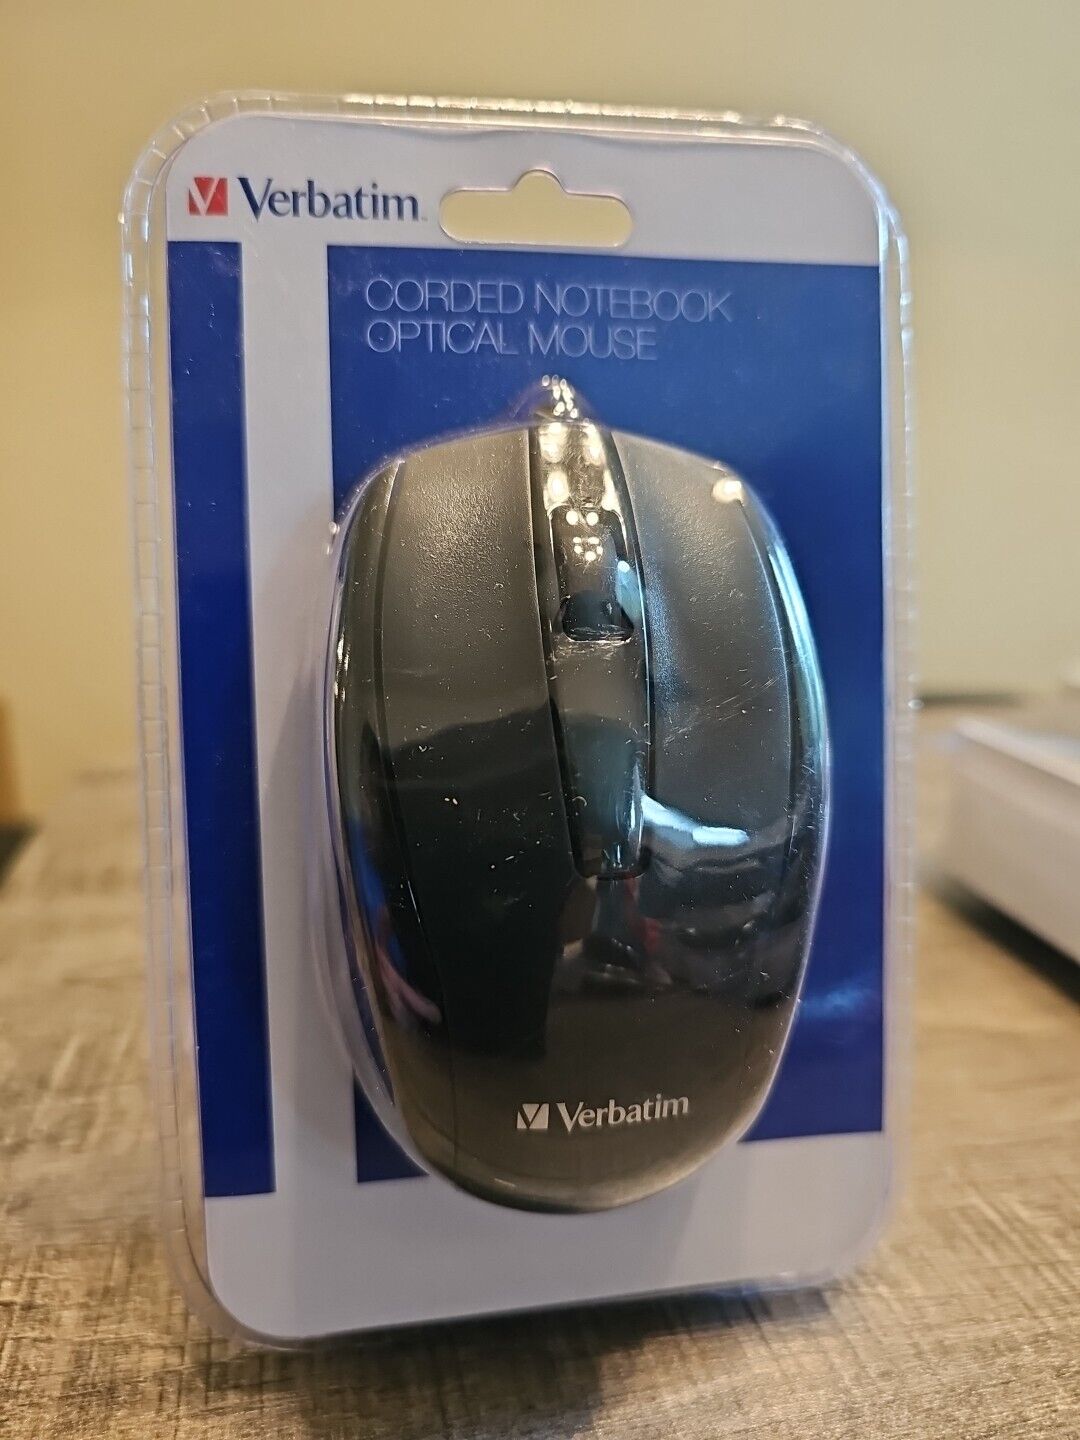 New Verbatim Corporation 98106 Corded Notebook Optical Mouse Black